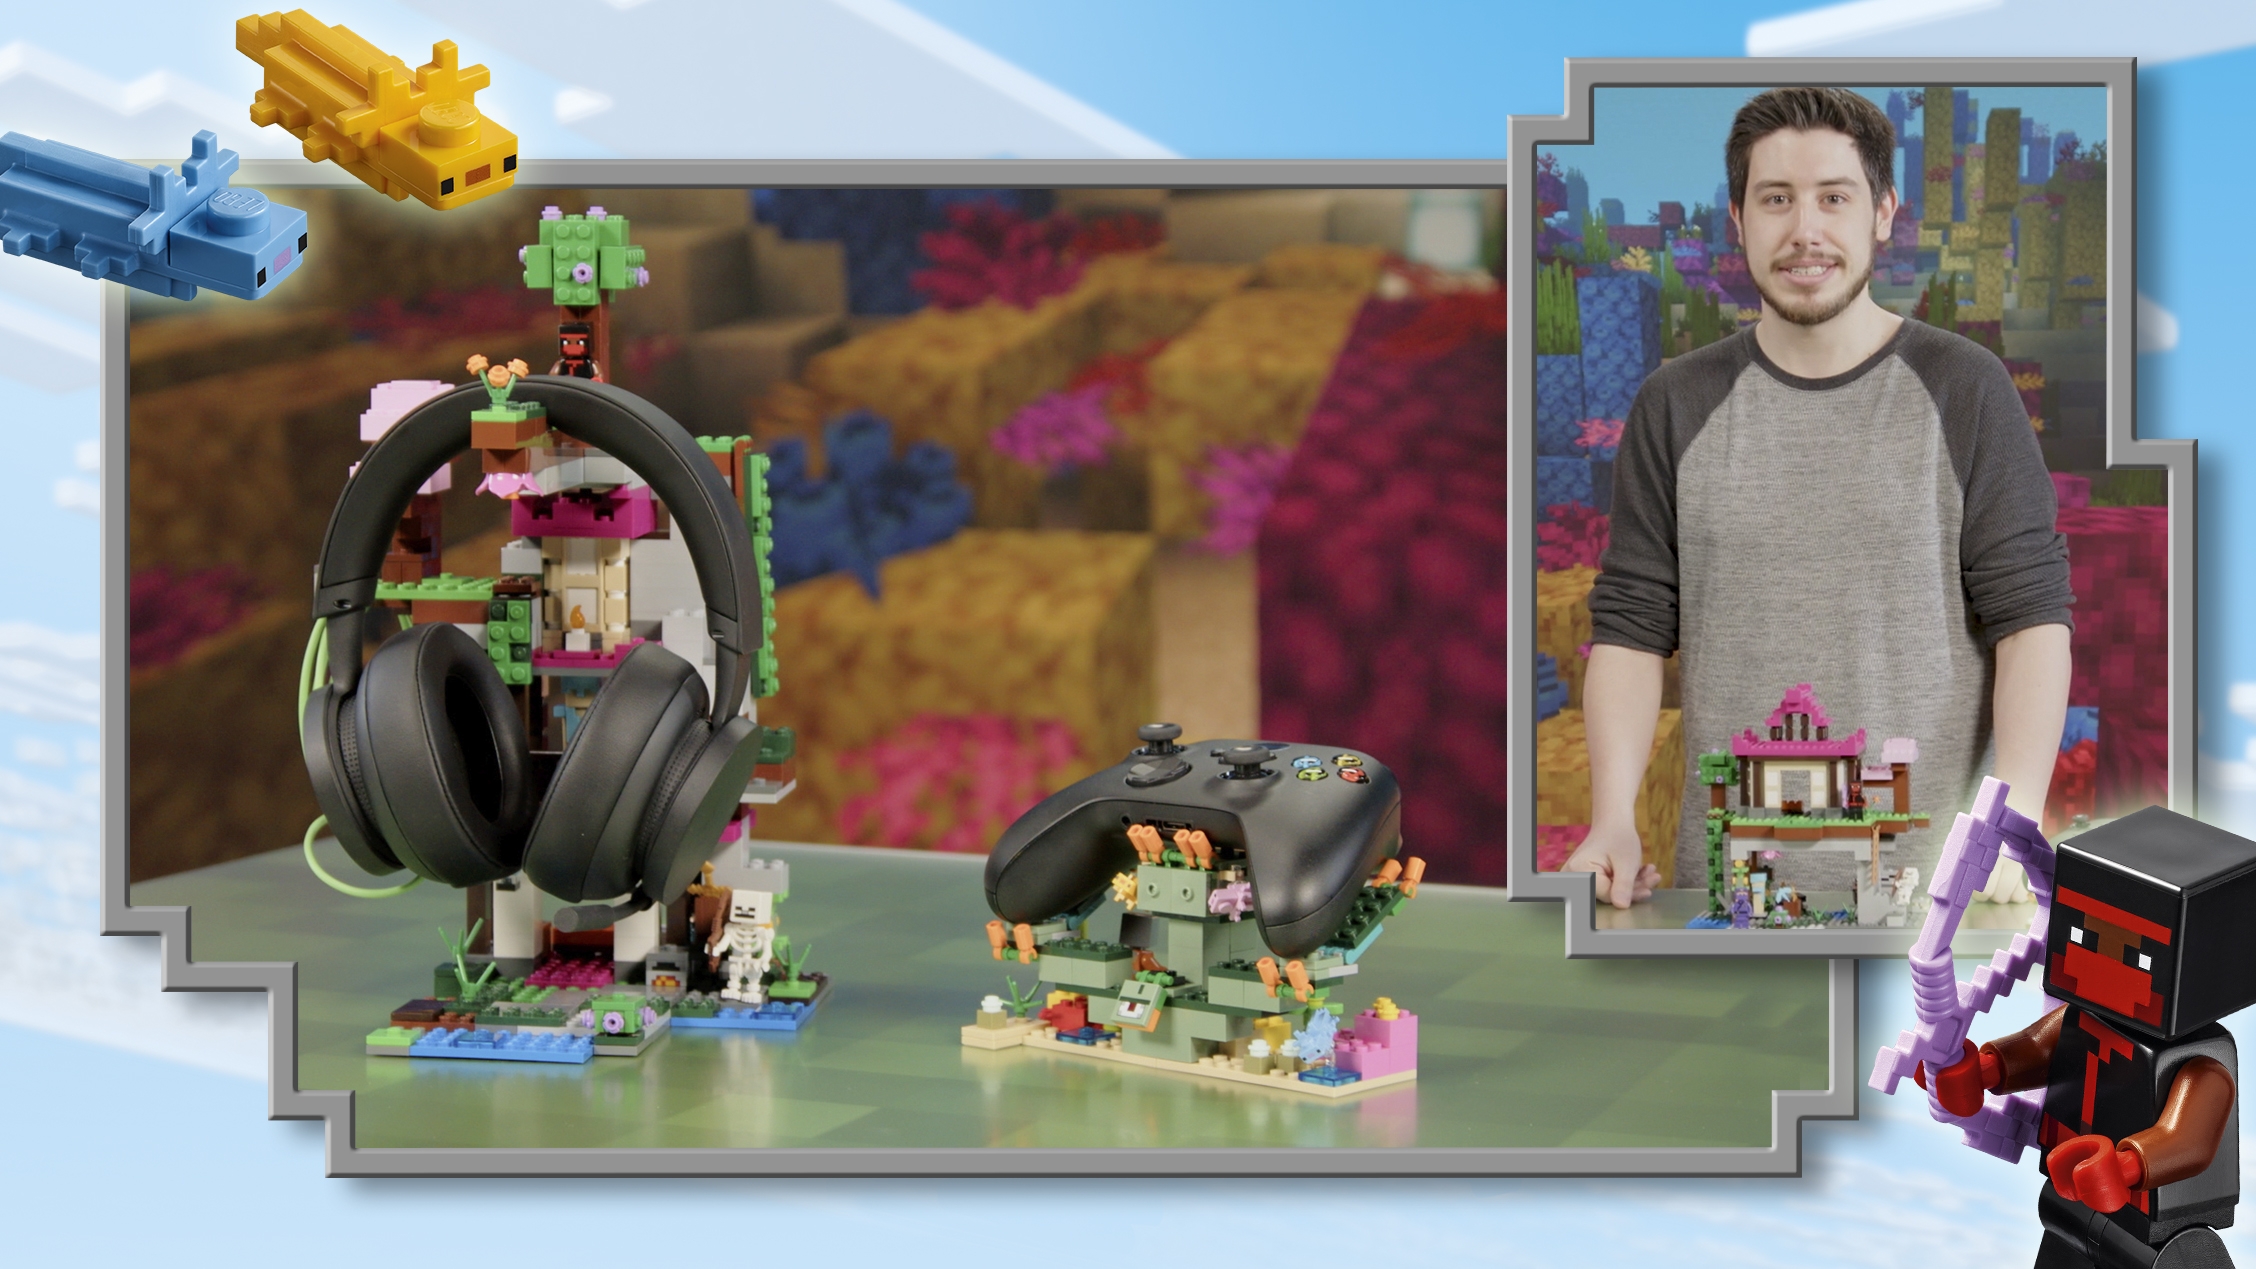 foursci on X: LEGO unveiled a $200 Minecraft set this morning - imagine a  ROBLOX one like this!  / X